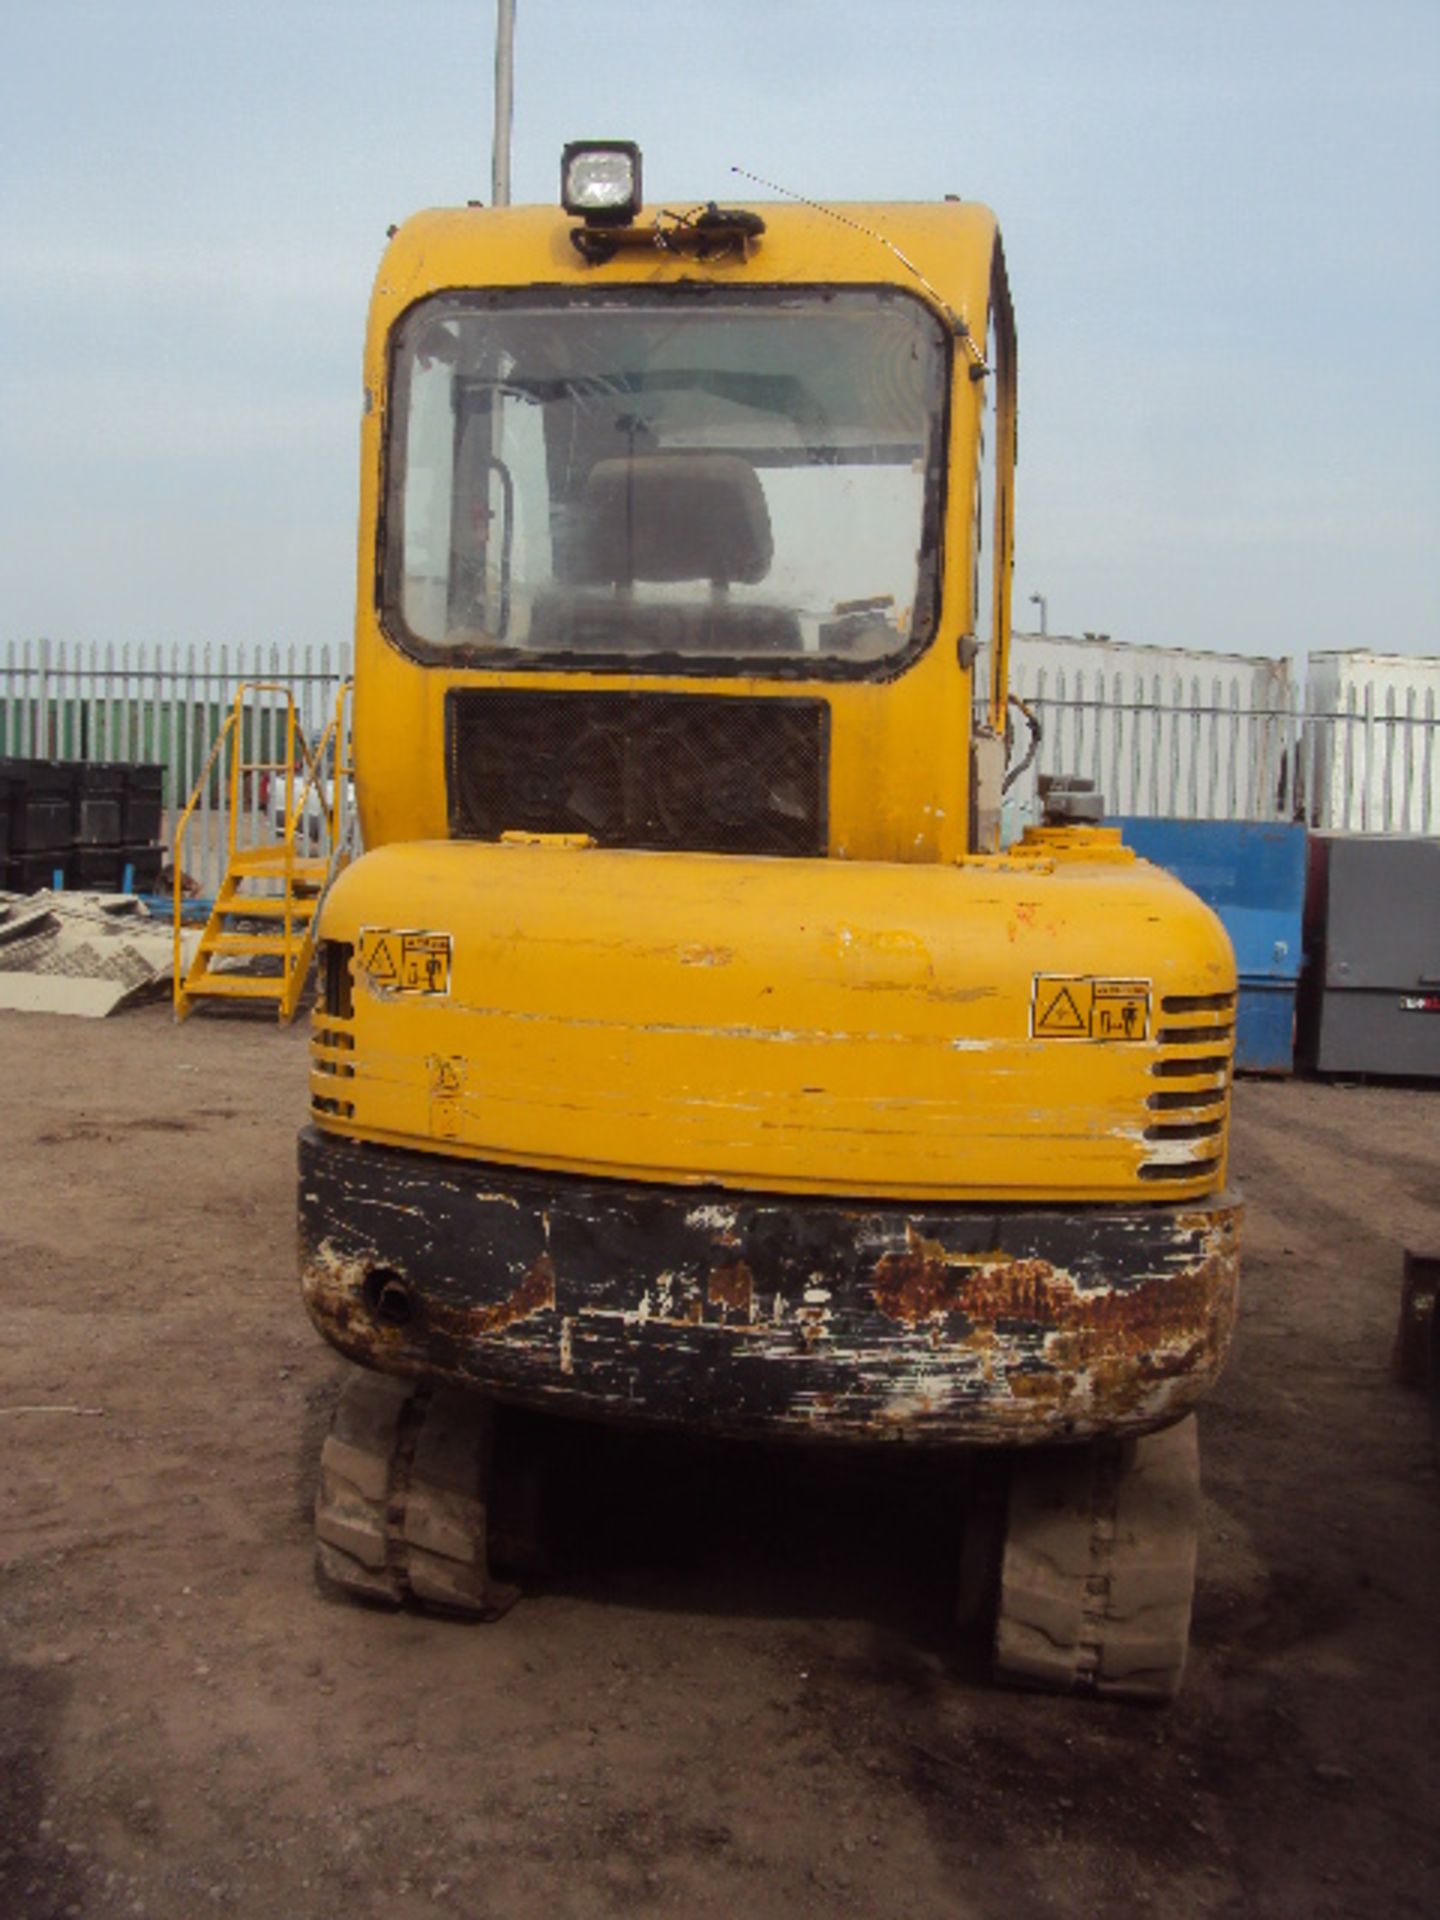 2008 YUACHI YC25-2 rubber tracked excavator, bucket, blade & piped s/n825A0100699 (RDD) - Image 3 of 6